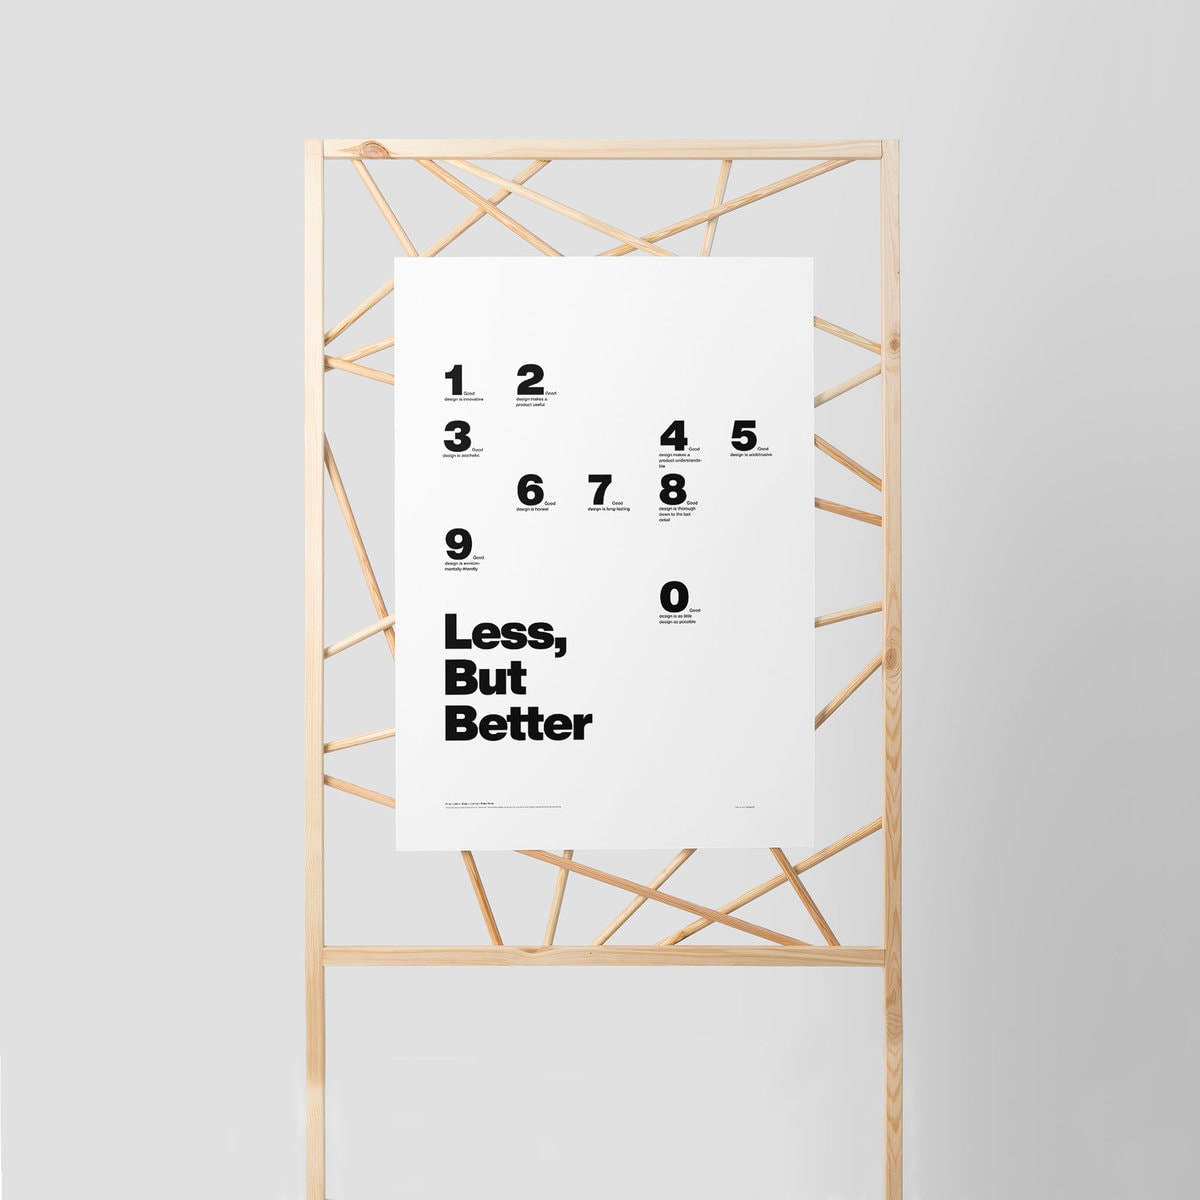 Less but better – 10 principles for good design – by Dieter Rams